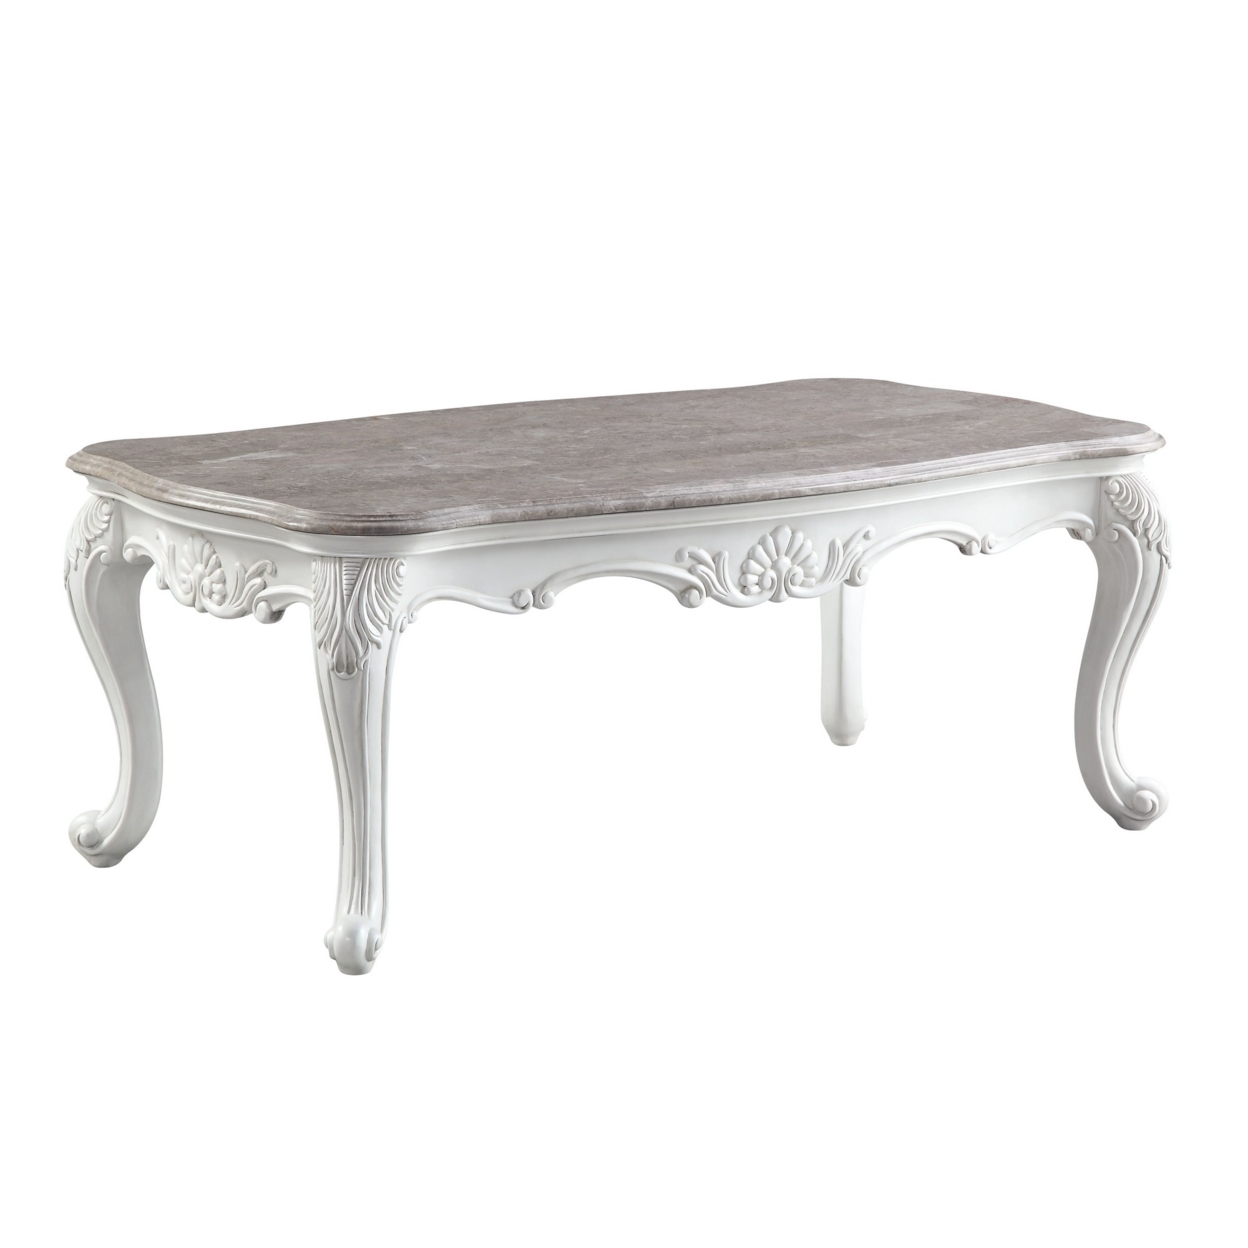 Coffee Table With Marble Top And Cabriole Legs, Antique White, Saltoro Sherpi